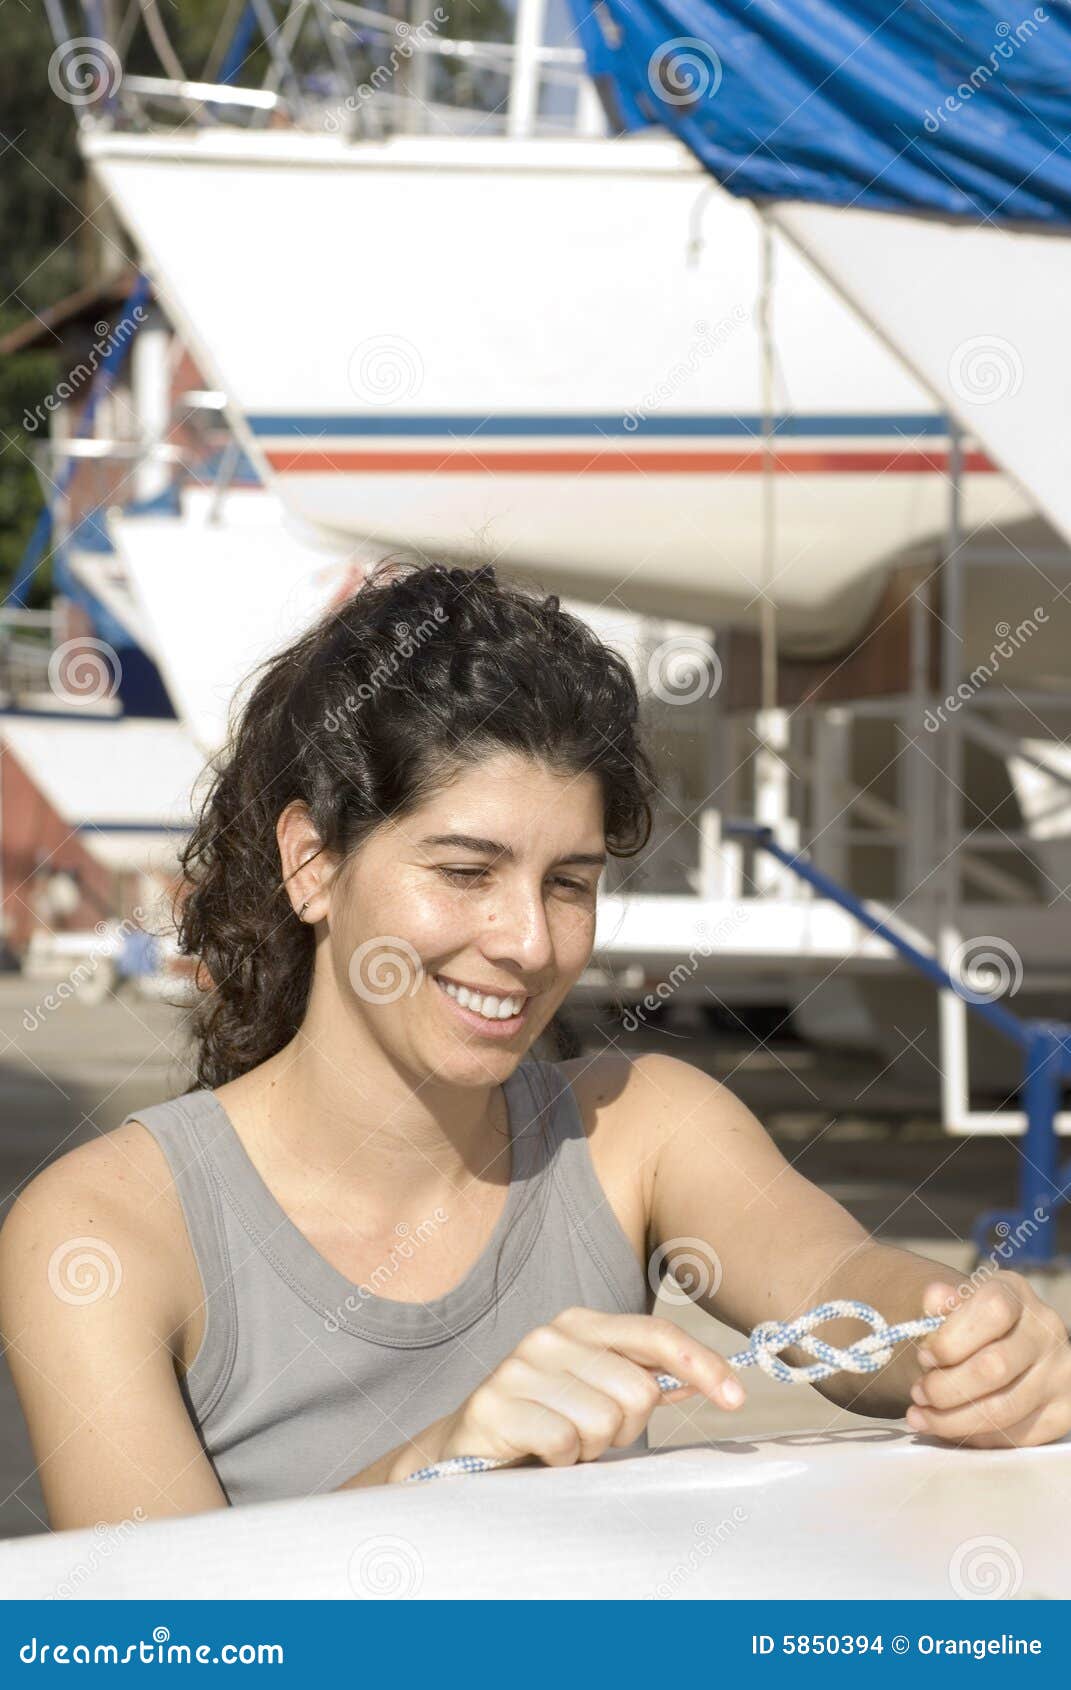 Woman Tying Knot On Sailboat - Vertical Stock Images 